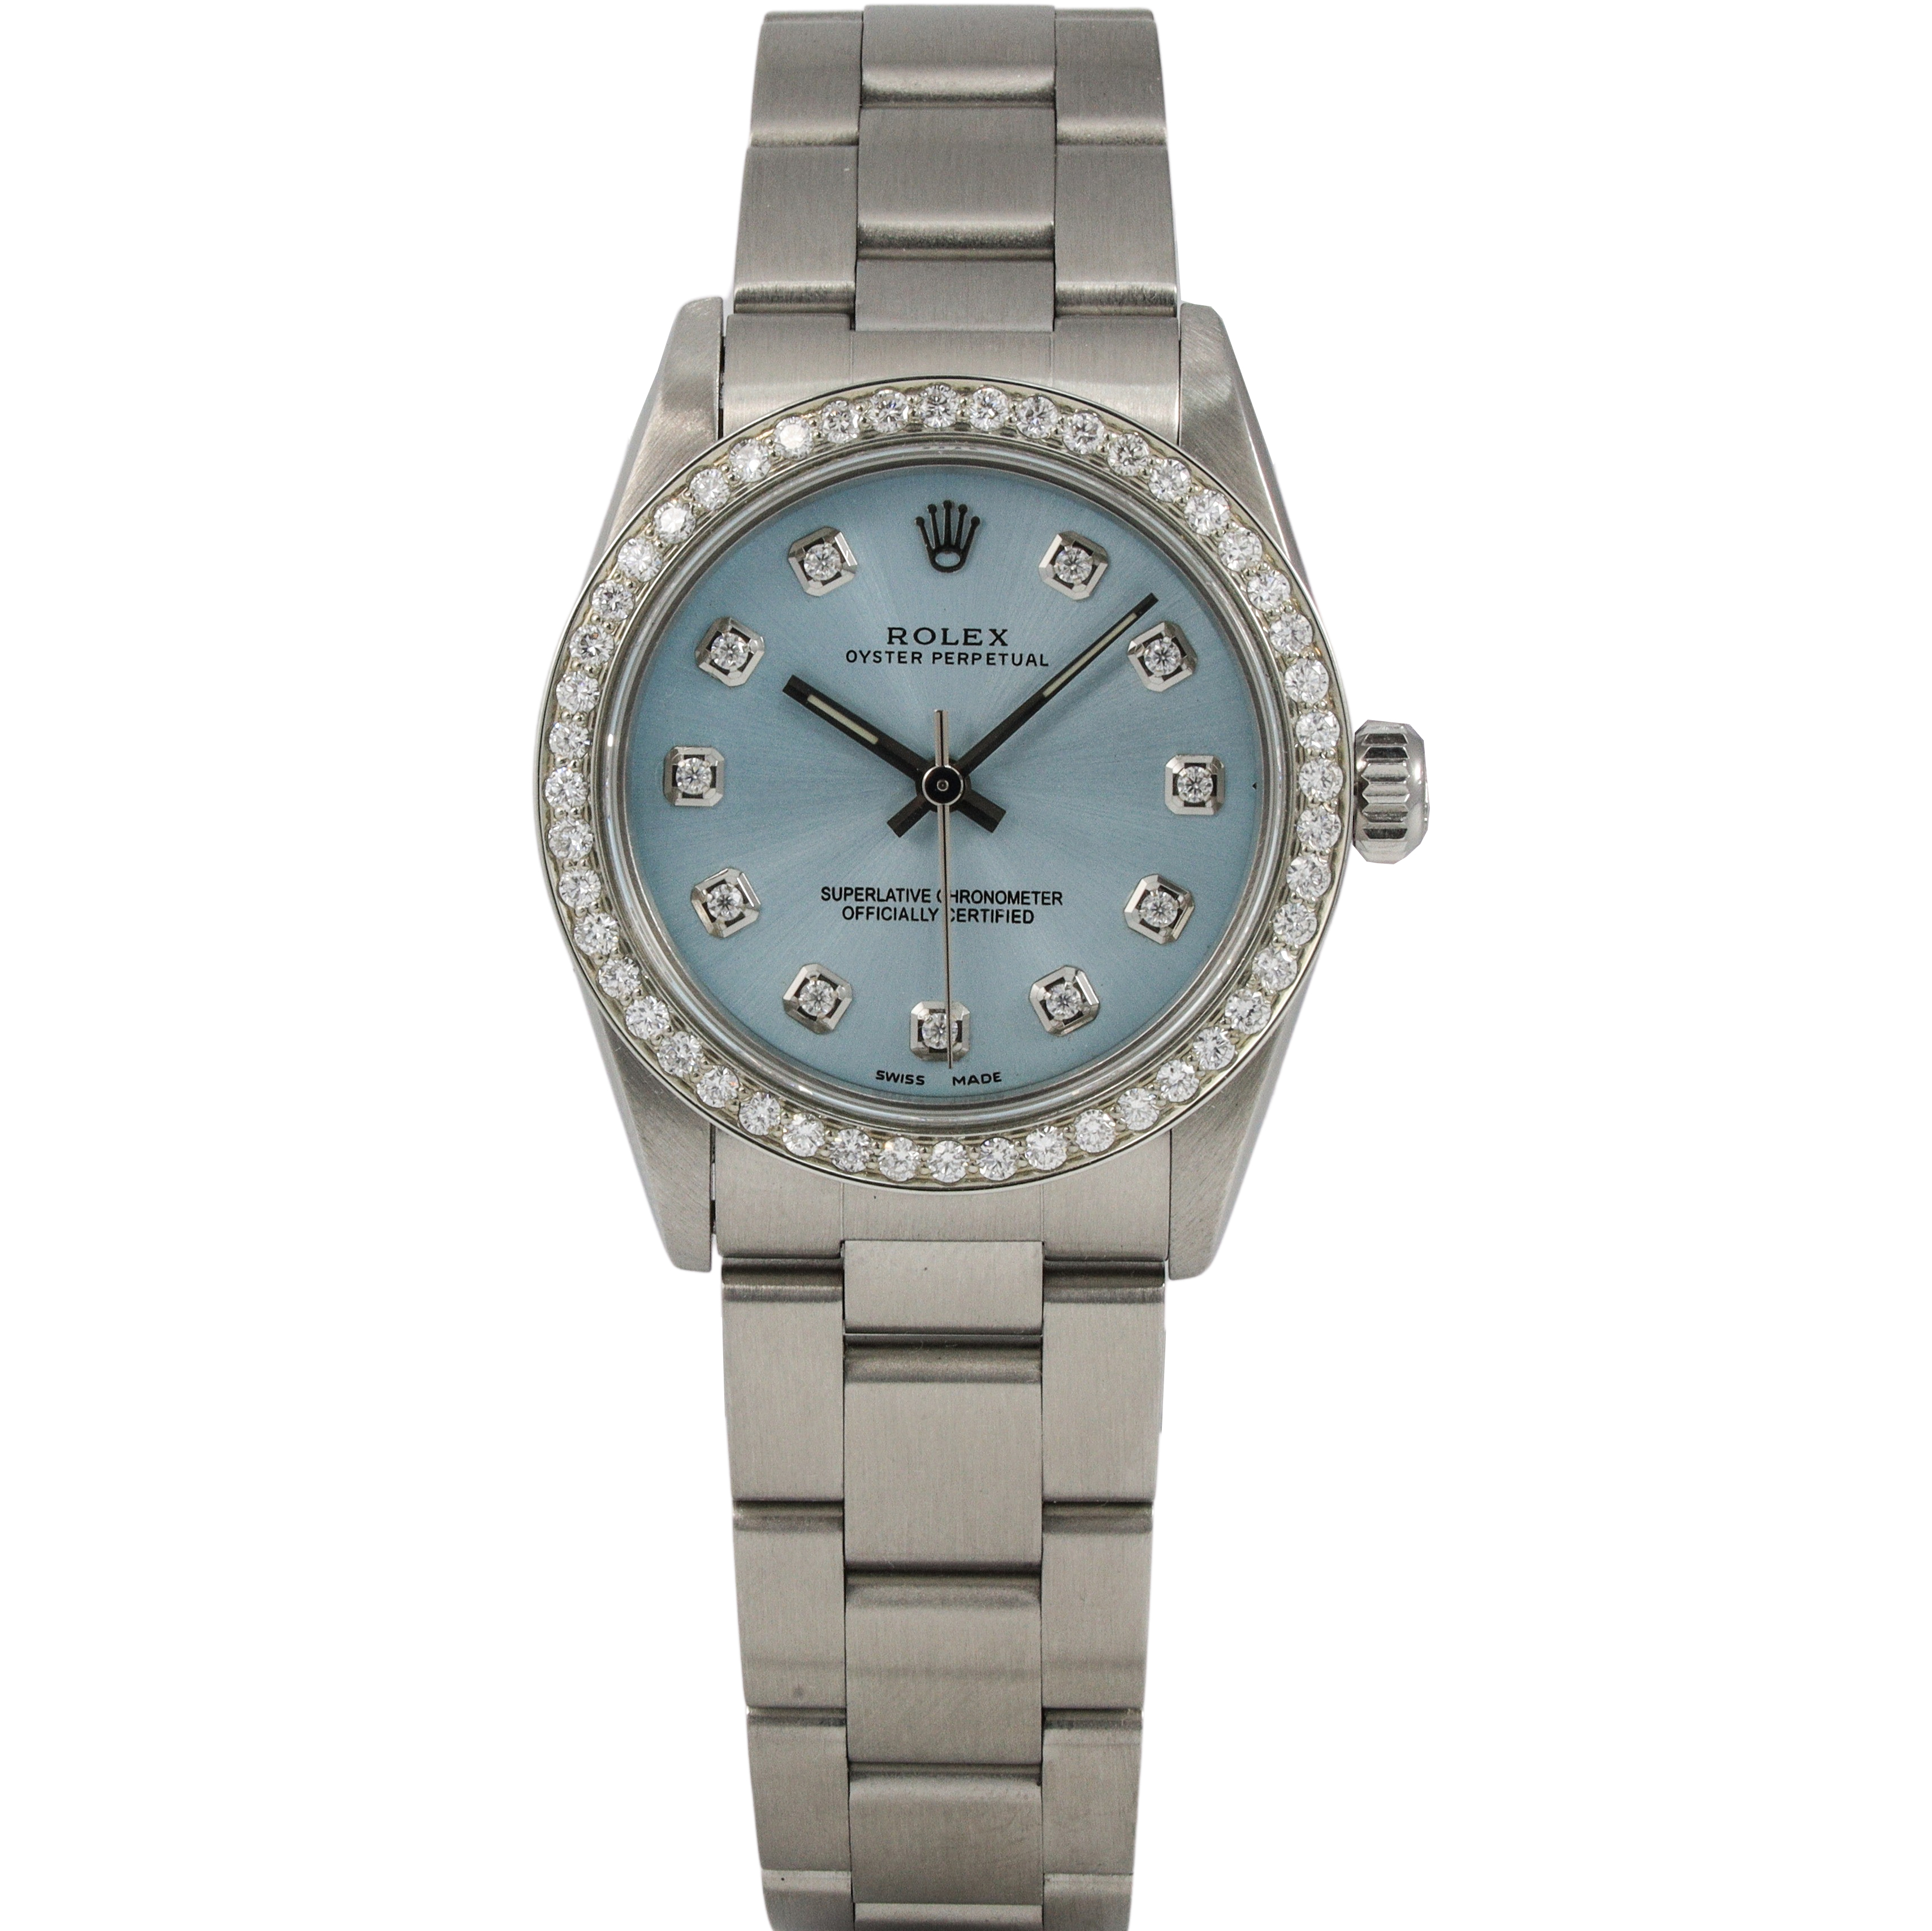 Monary Rolex Oyster Perpetual, Stainless Steal Oyster Bracelet, Light Blue Dial, 18K White Gold Diamond Bezel 32mm Watch